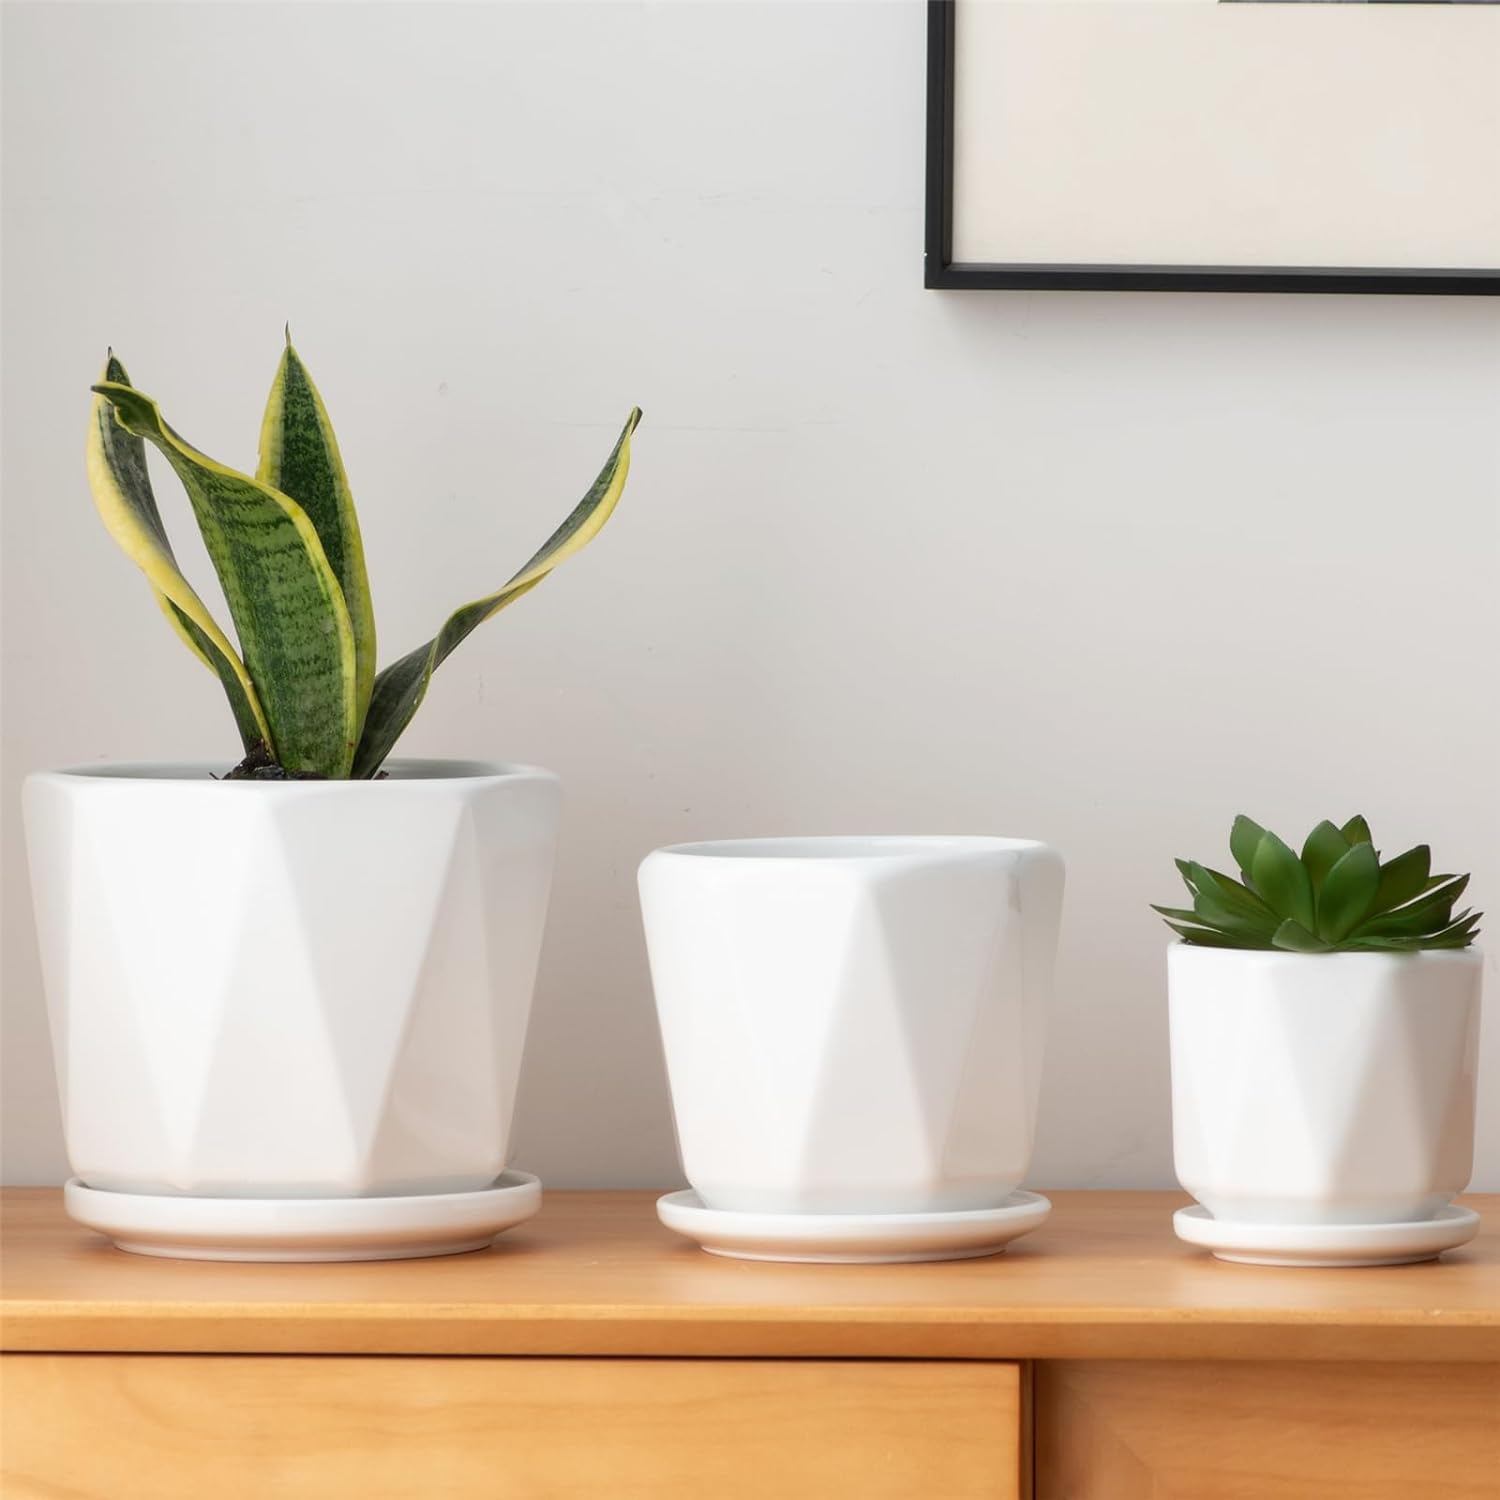 Octagon Ceramic Plant Pots - Indoor White Flower Planter Set with Drainage Holes, 6.5/5.5/4.5 Inch, Modern Decorative Planter Outdoor for Succulents Snakes and Herb